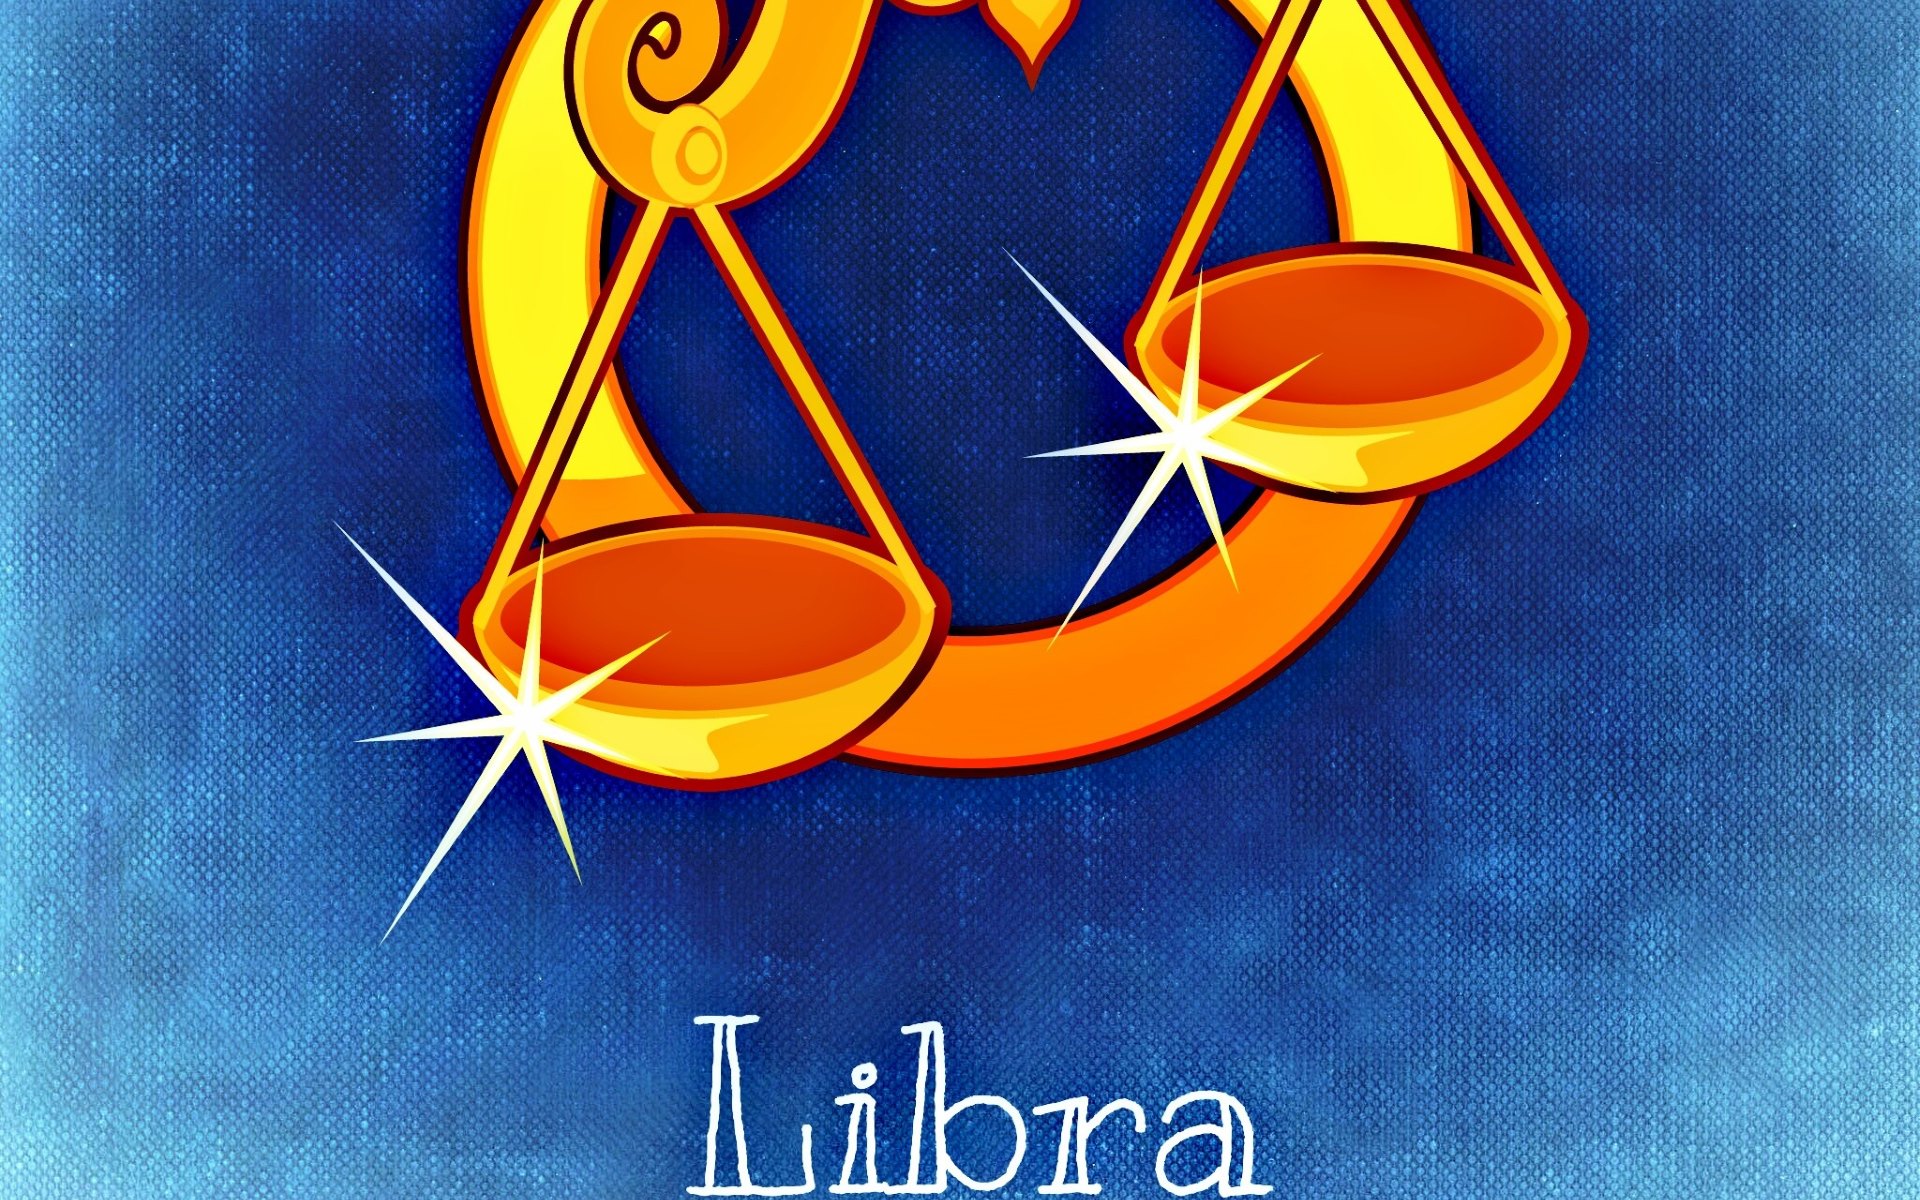 Libra (Astrology) wallpapers for desktop, download free Libra (Astrology)  pictures and backgrounds for PC 